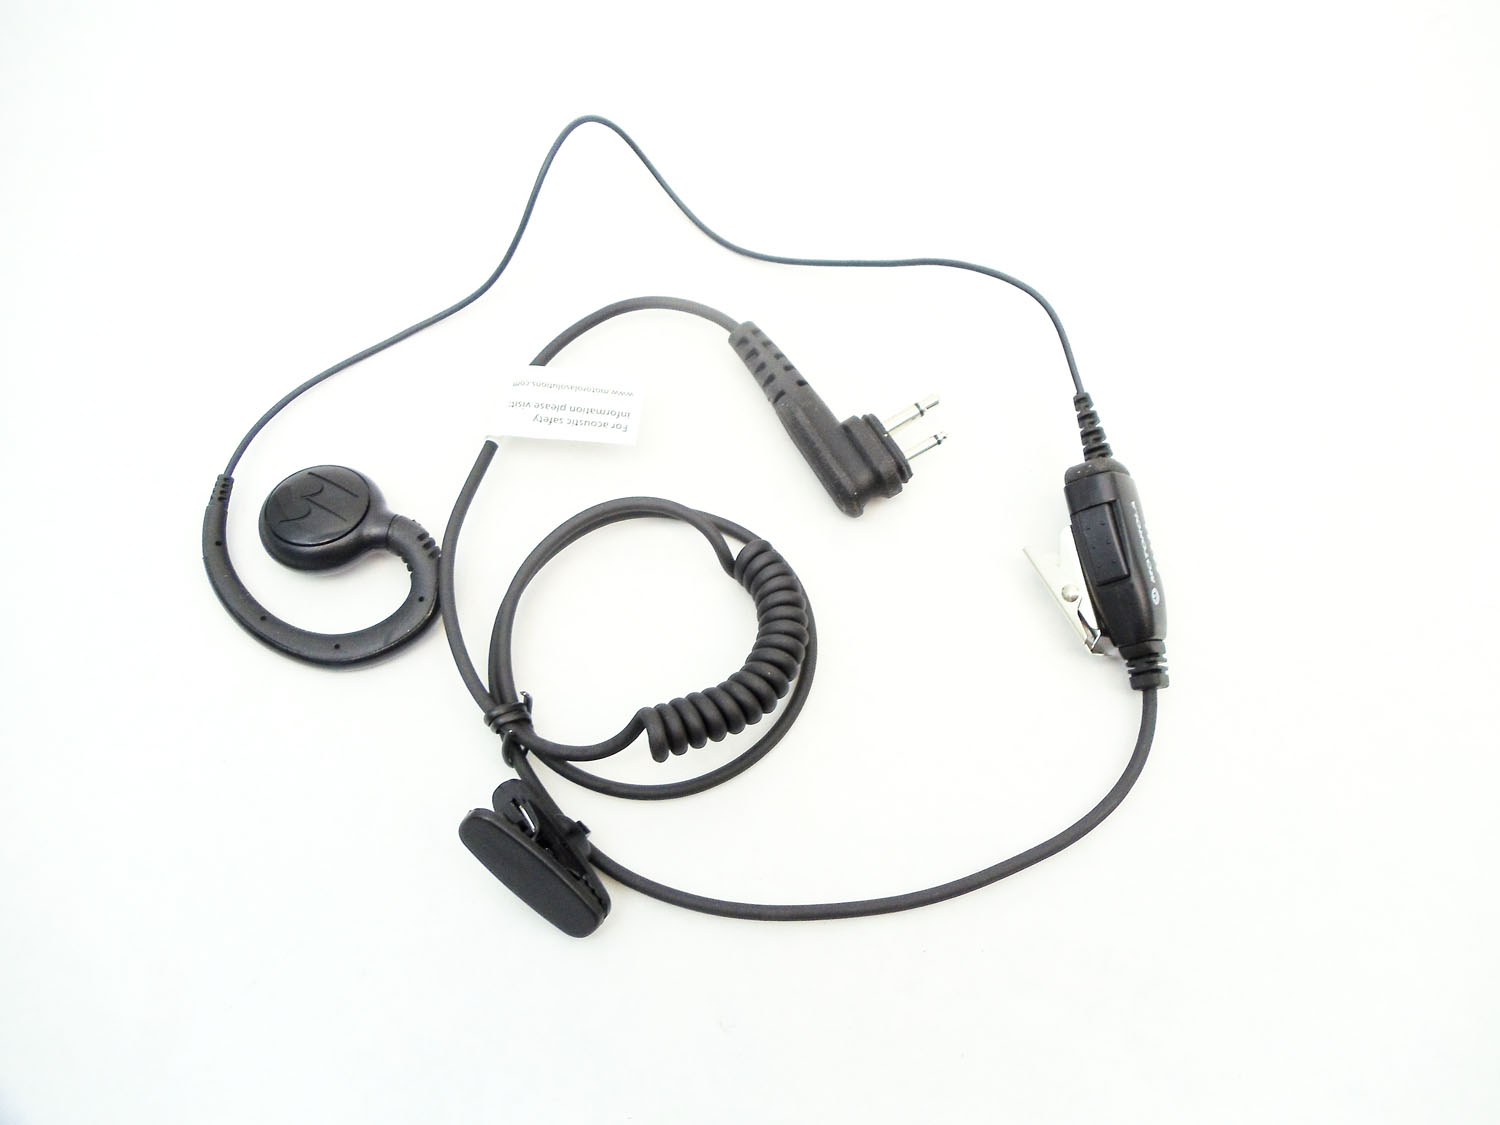 Motorola - Swivel Earpiece With Inline Push To Talk Button For  Microphone For Rdx Series Radios